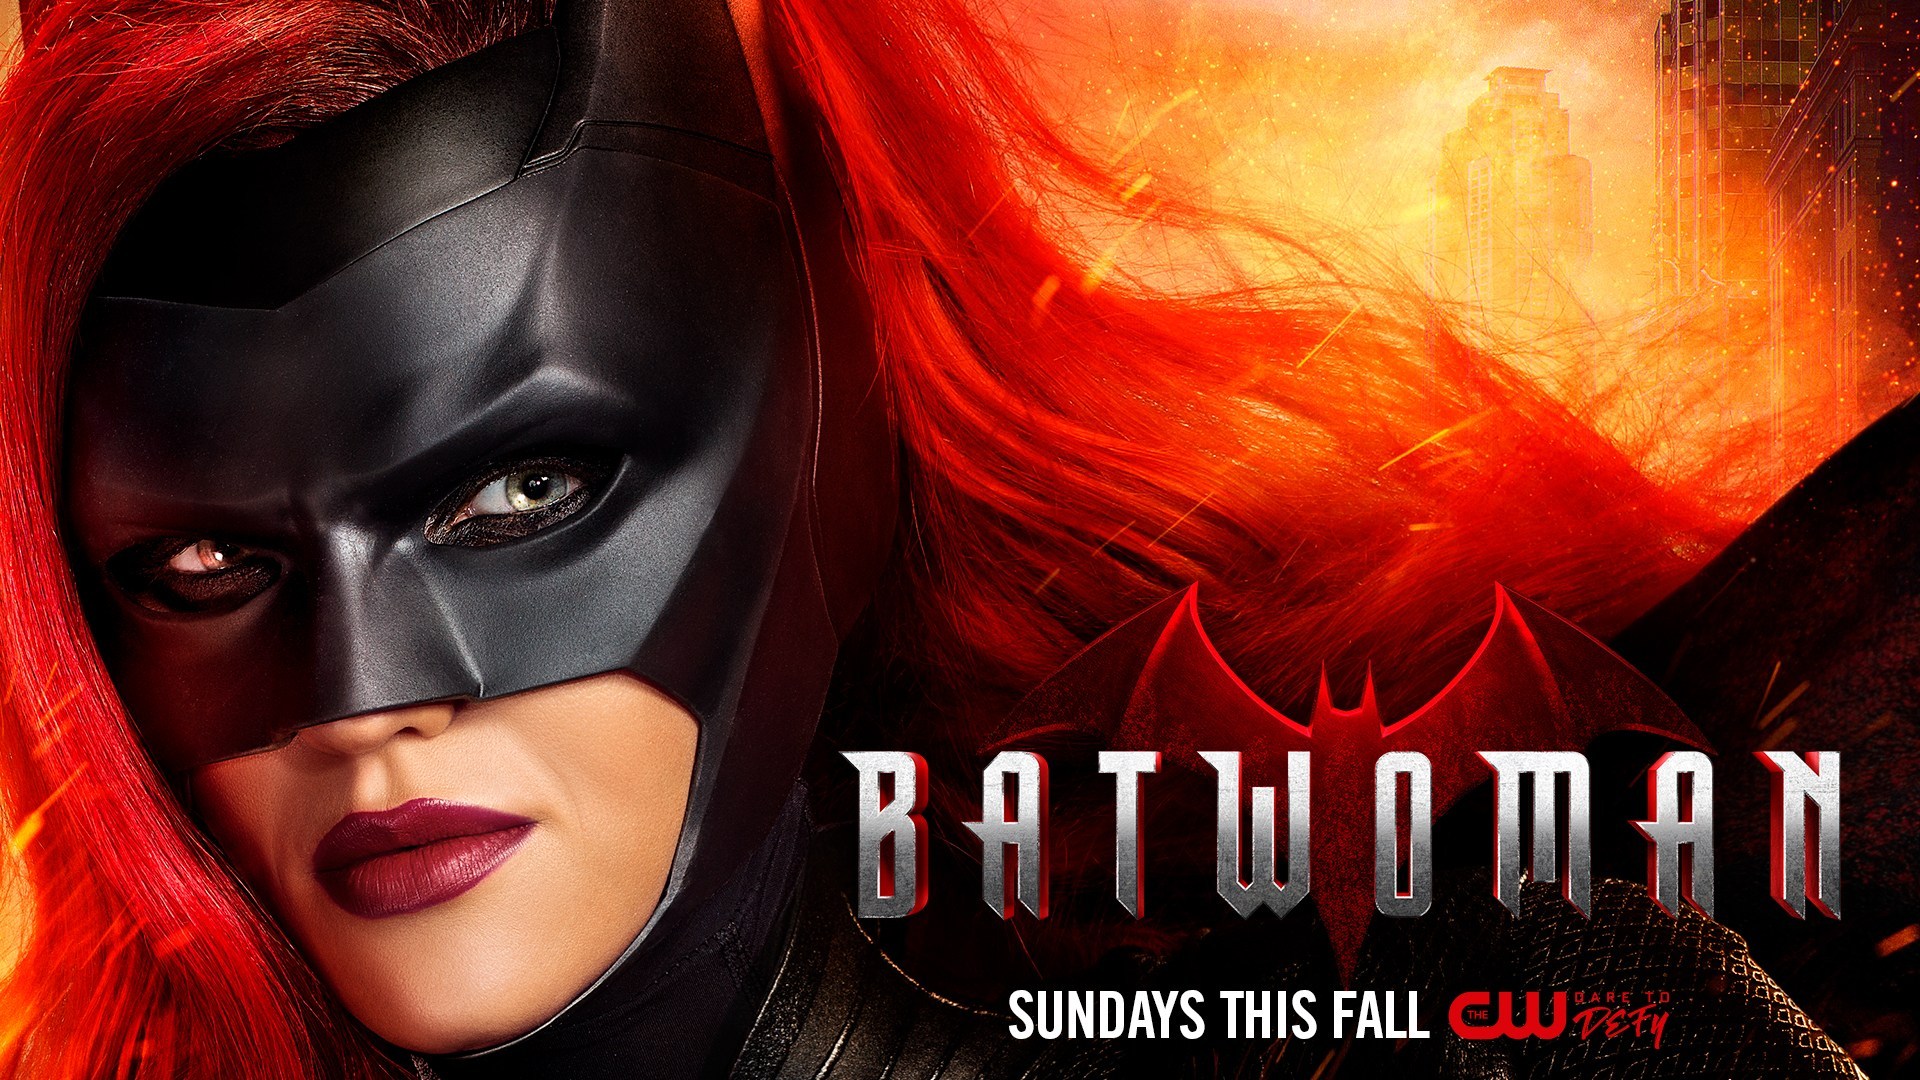 Batwoman Poster released at Comic-Con